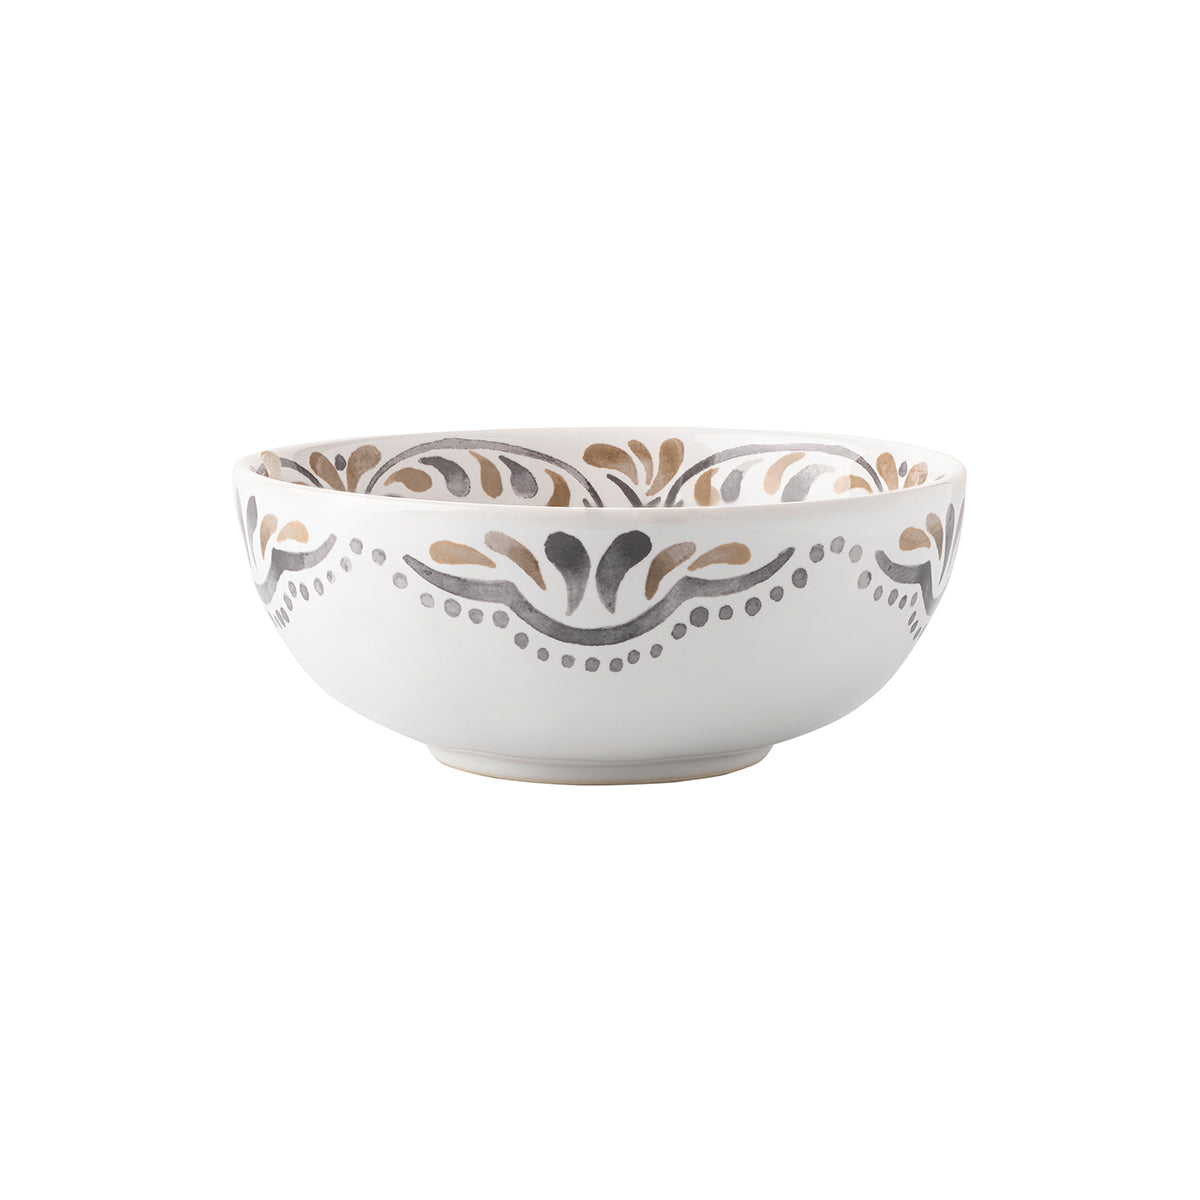 A journey to the sandy Iberian coast inspired this Iberian Journey motif. We've reinterpreted this region's hand-painted tiles in a neutral color palette of sand, stones and earth onto key accent pieces such as this cereal/ice cream bowl.